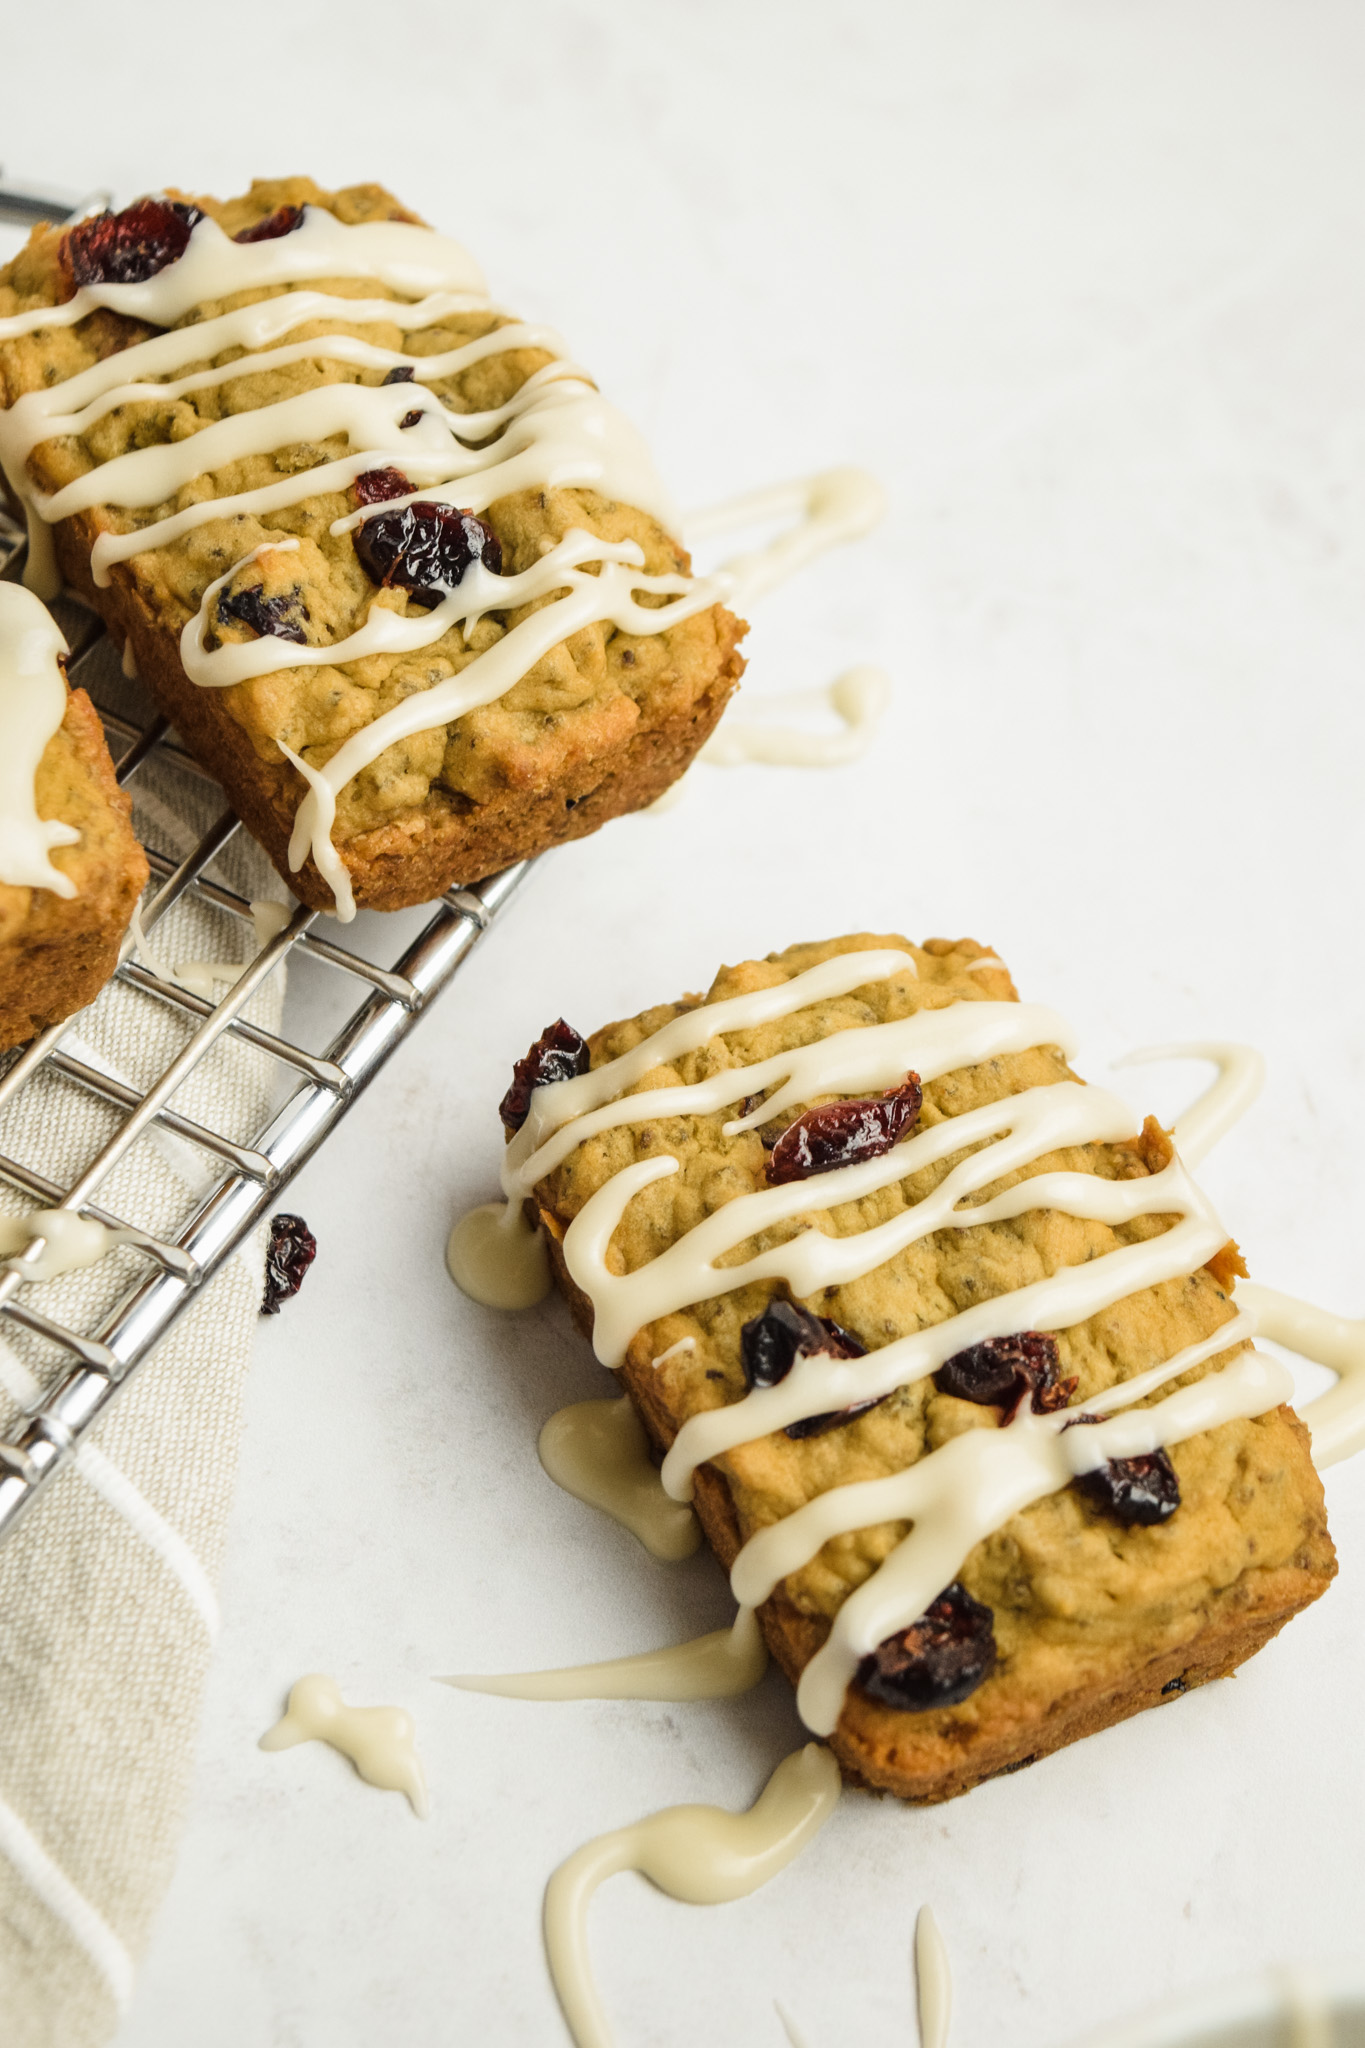 Small Gluten Free Cranberry Orange Loaf with a Sweet Drizzle